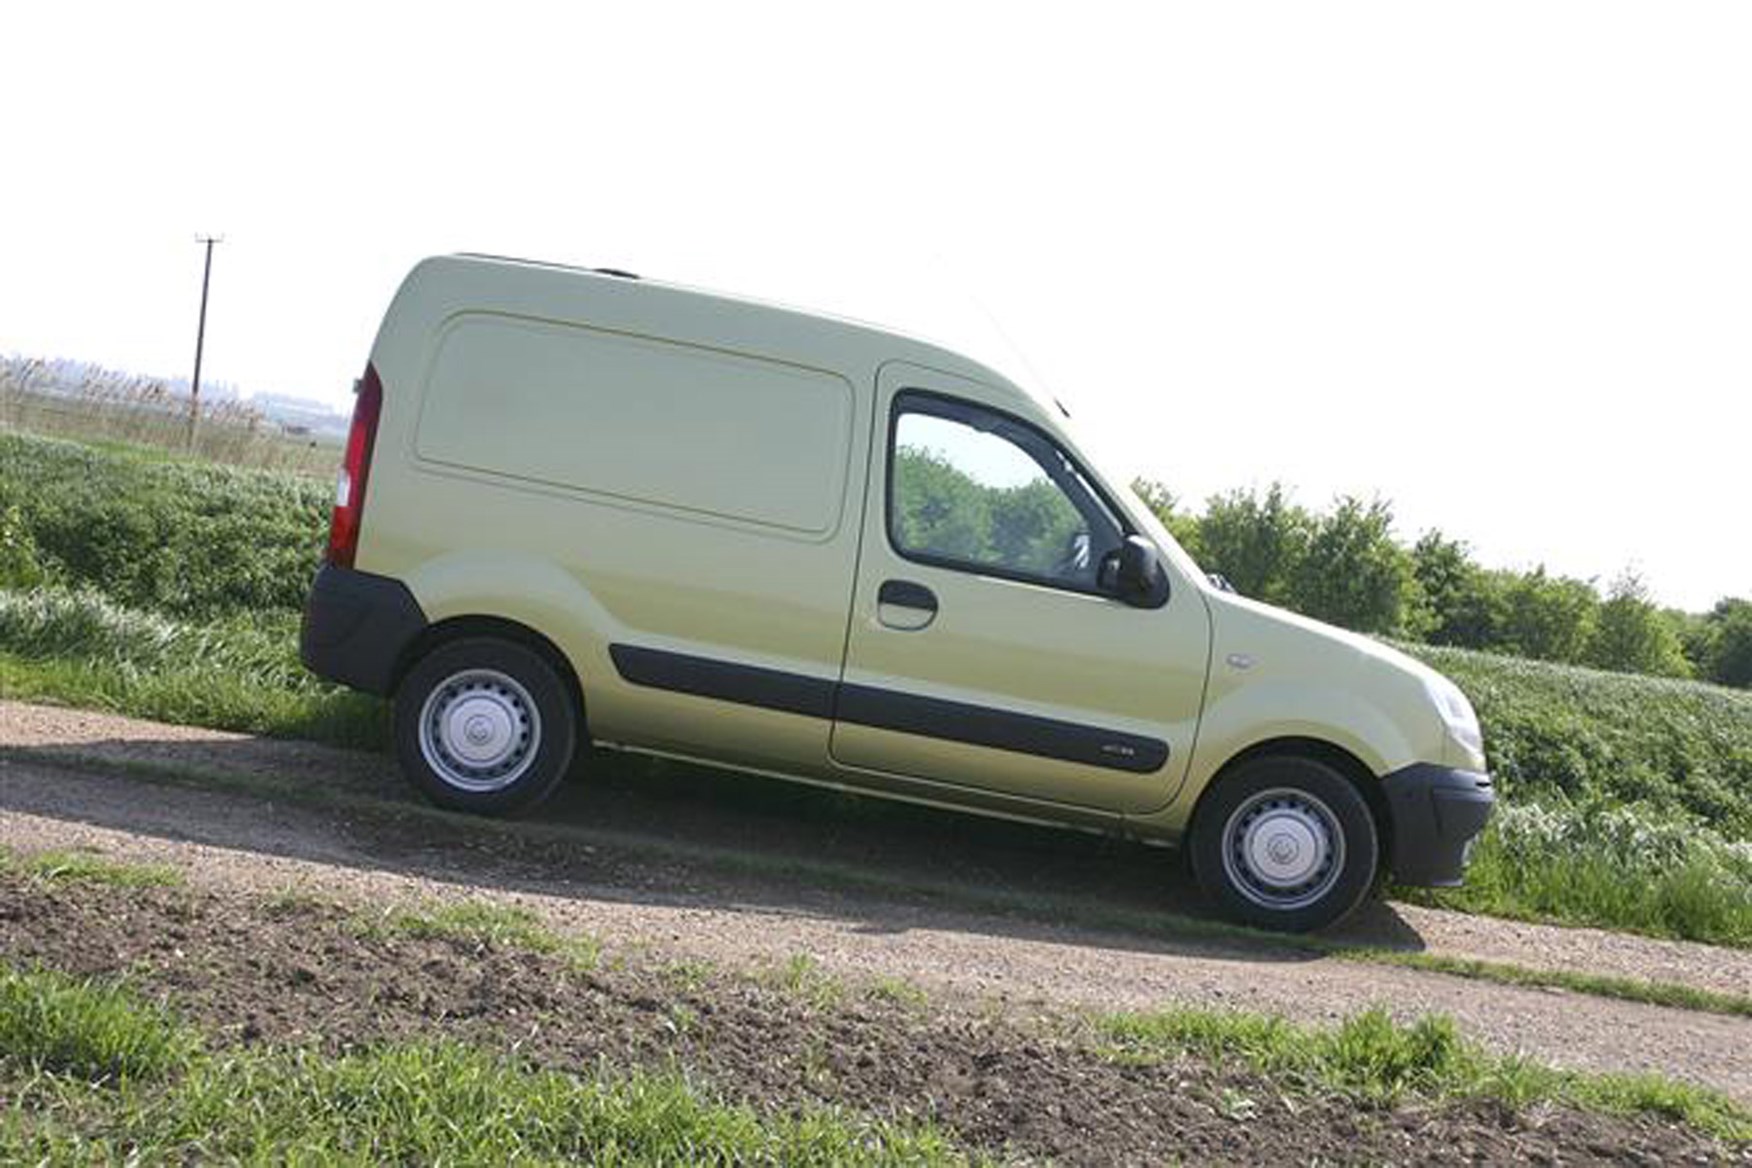 Nissan Kubistar review on Parkers Vans - on the road